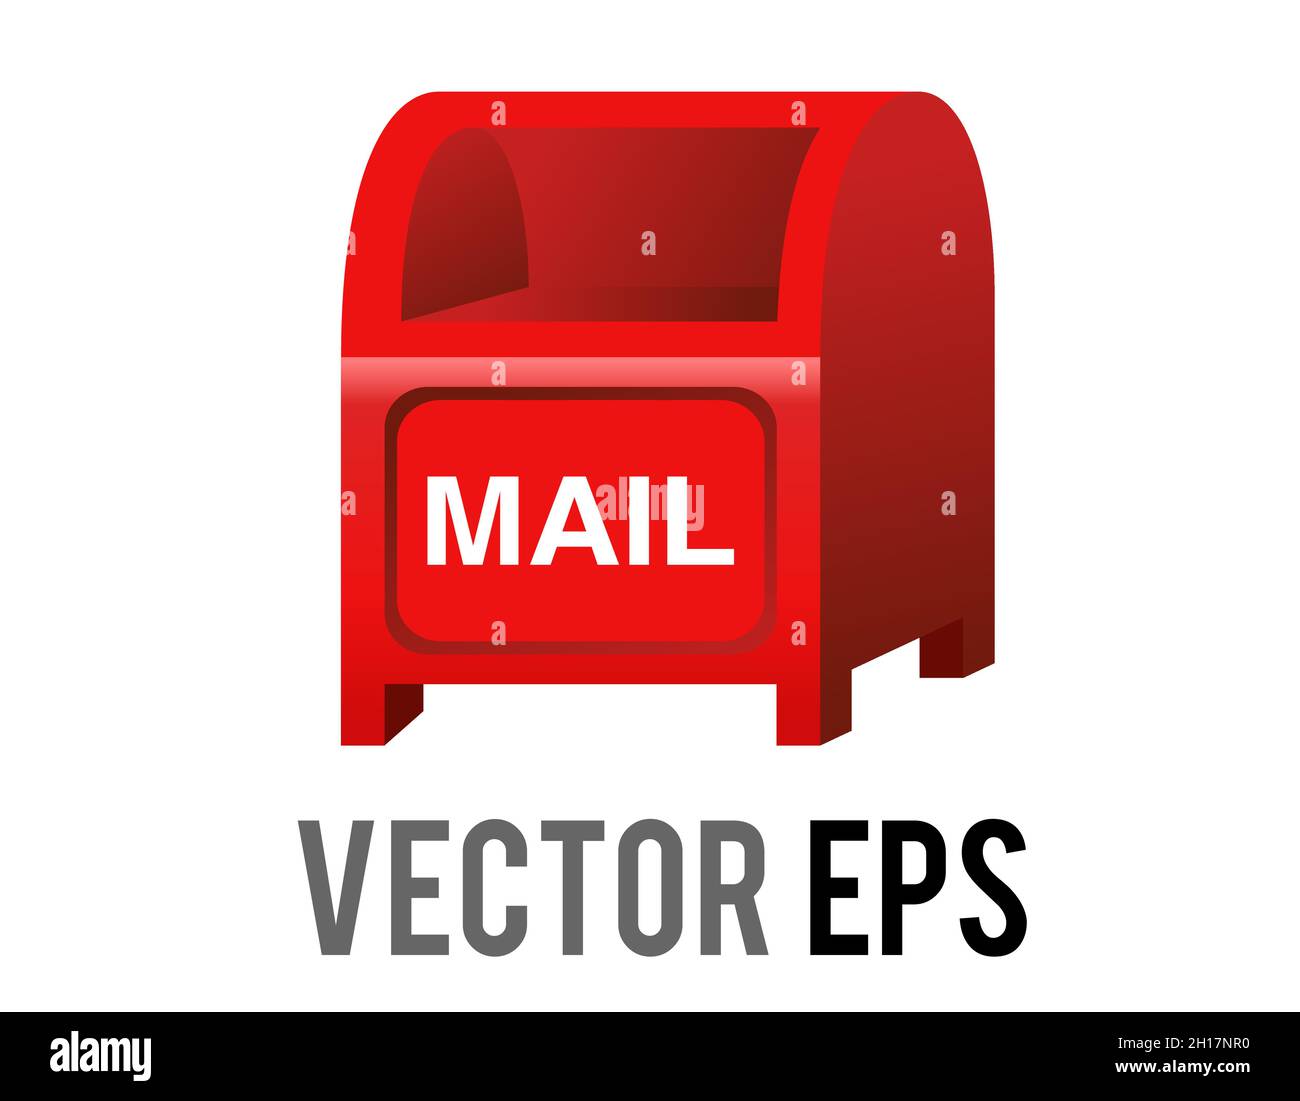 Set Isolated Retro Mailbox Vintage Post Stock Vector (Royalty Free